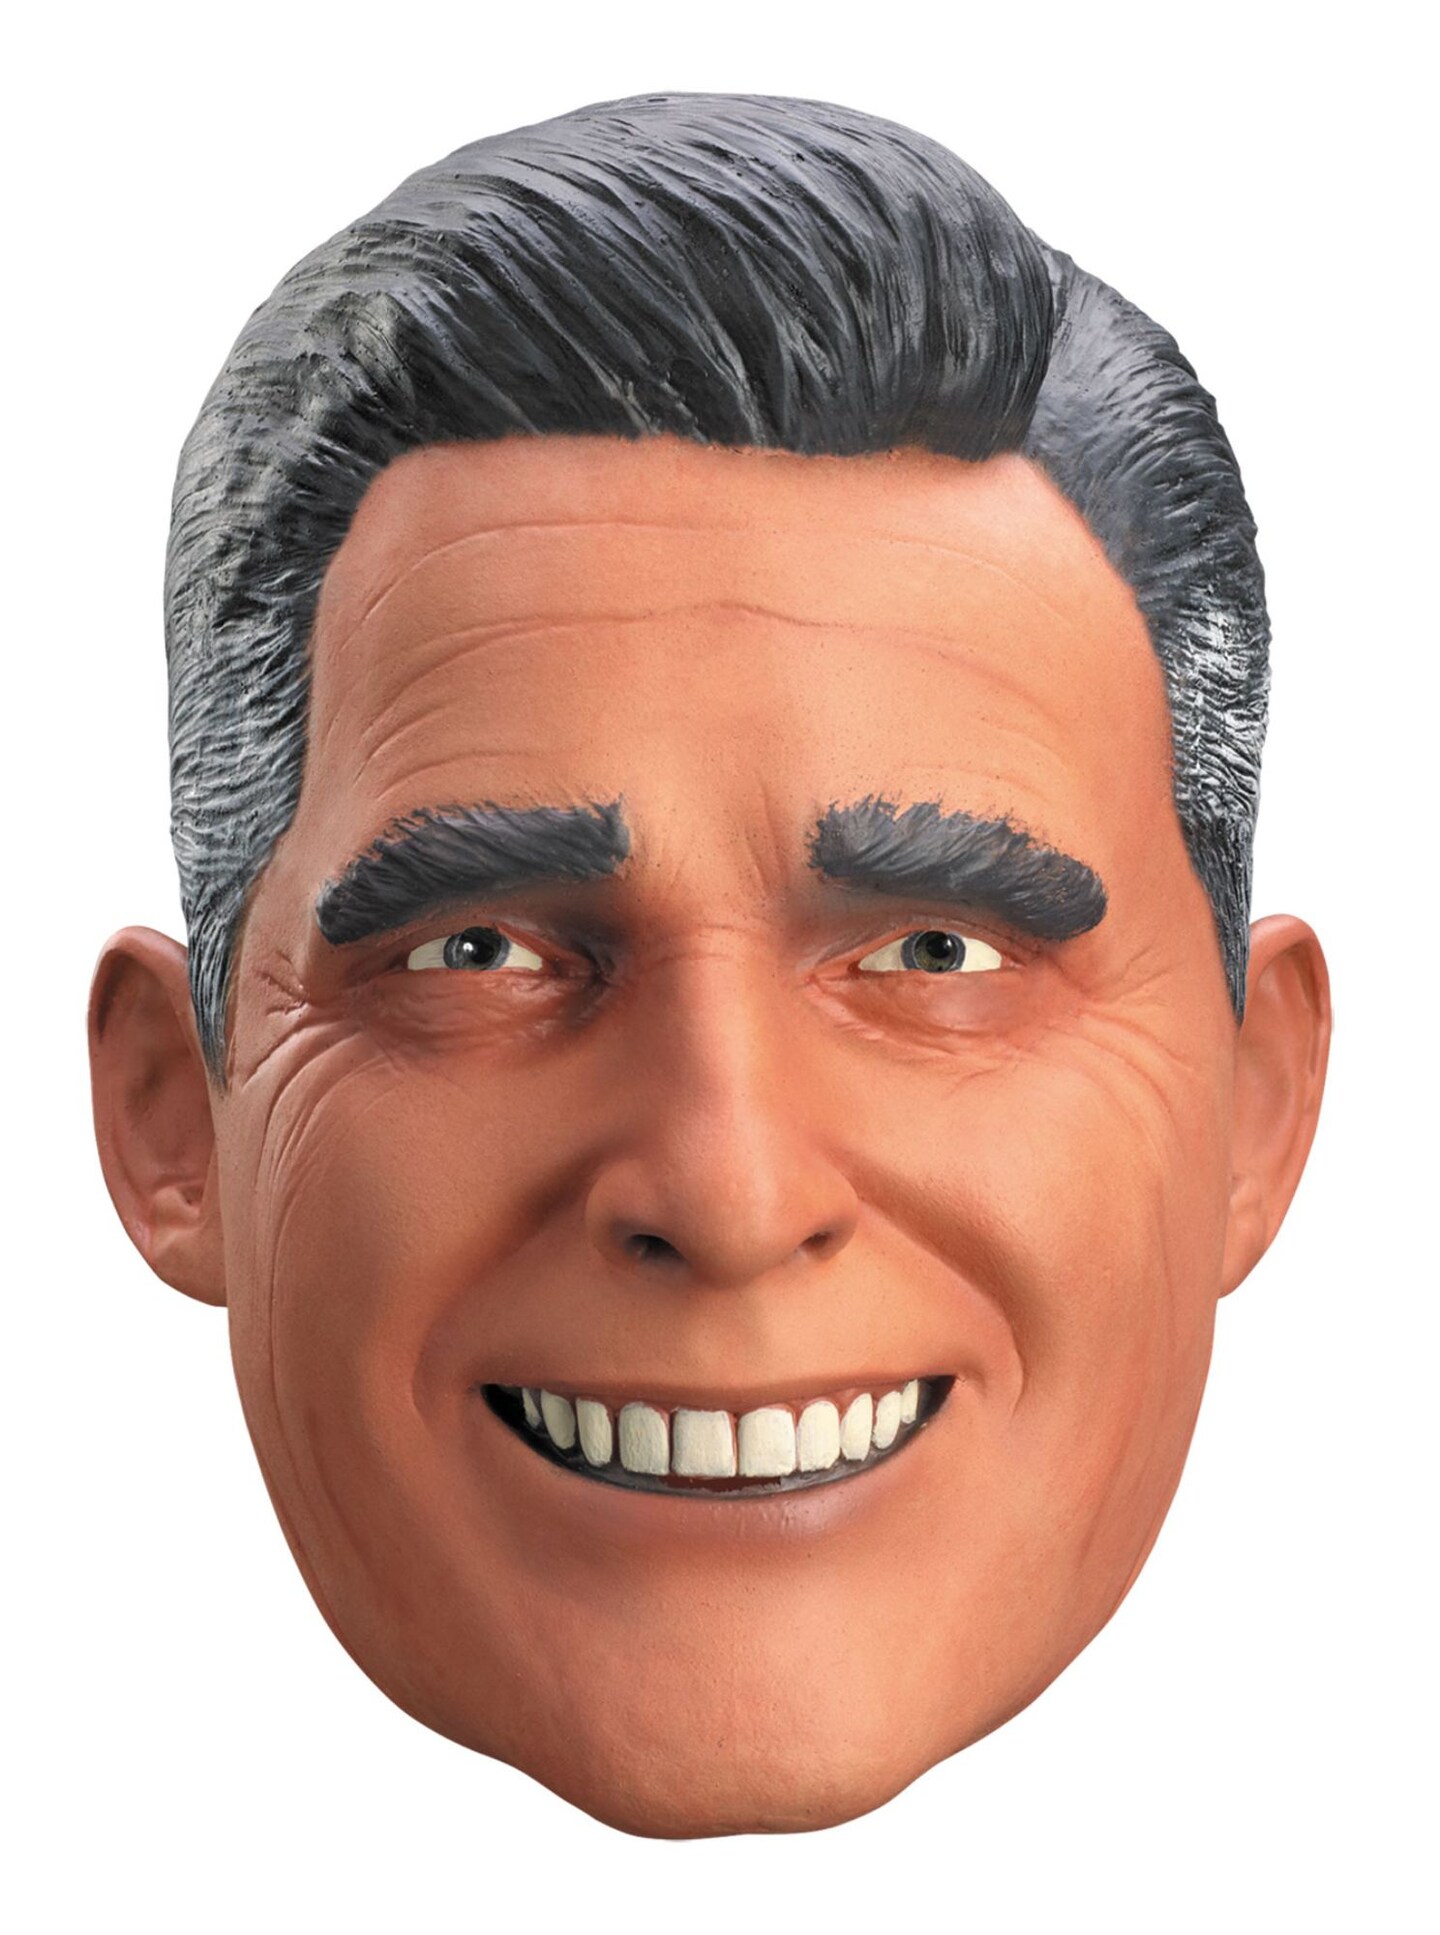 The Costume Center Beige Presidential Romney Men Adult Halloween Mask Costume Accessory - One Size